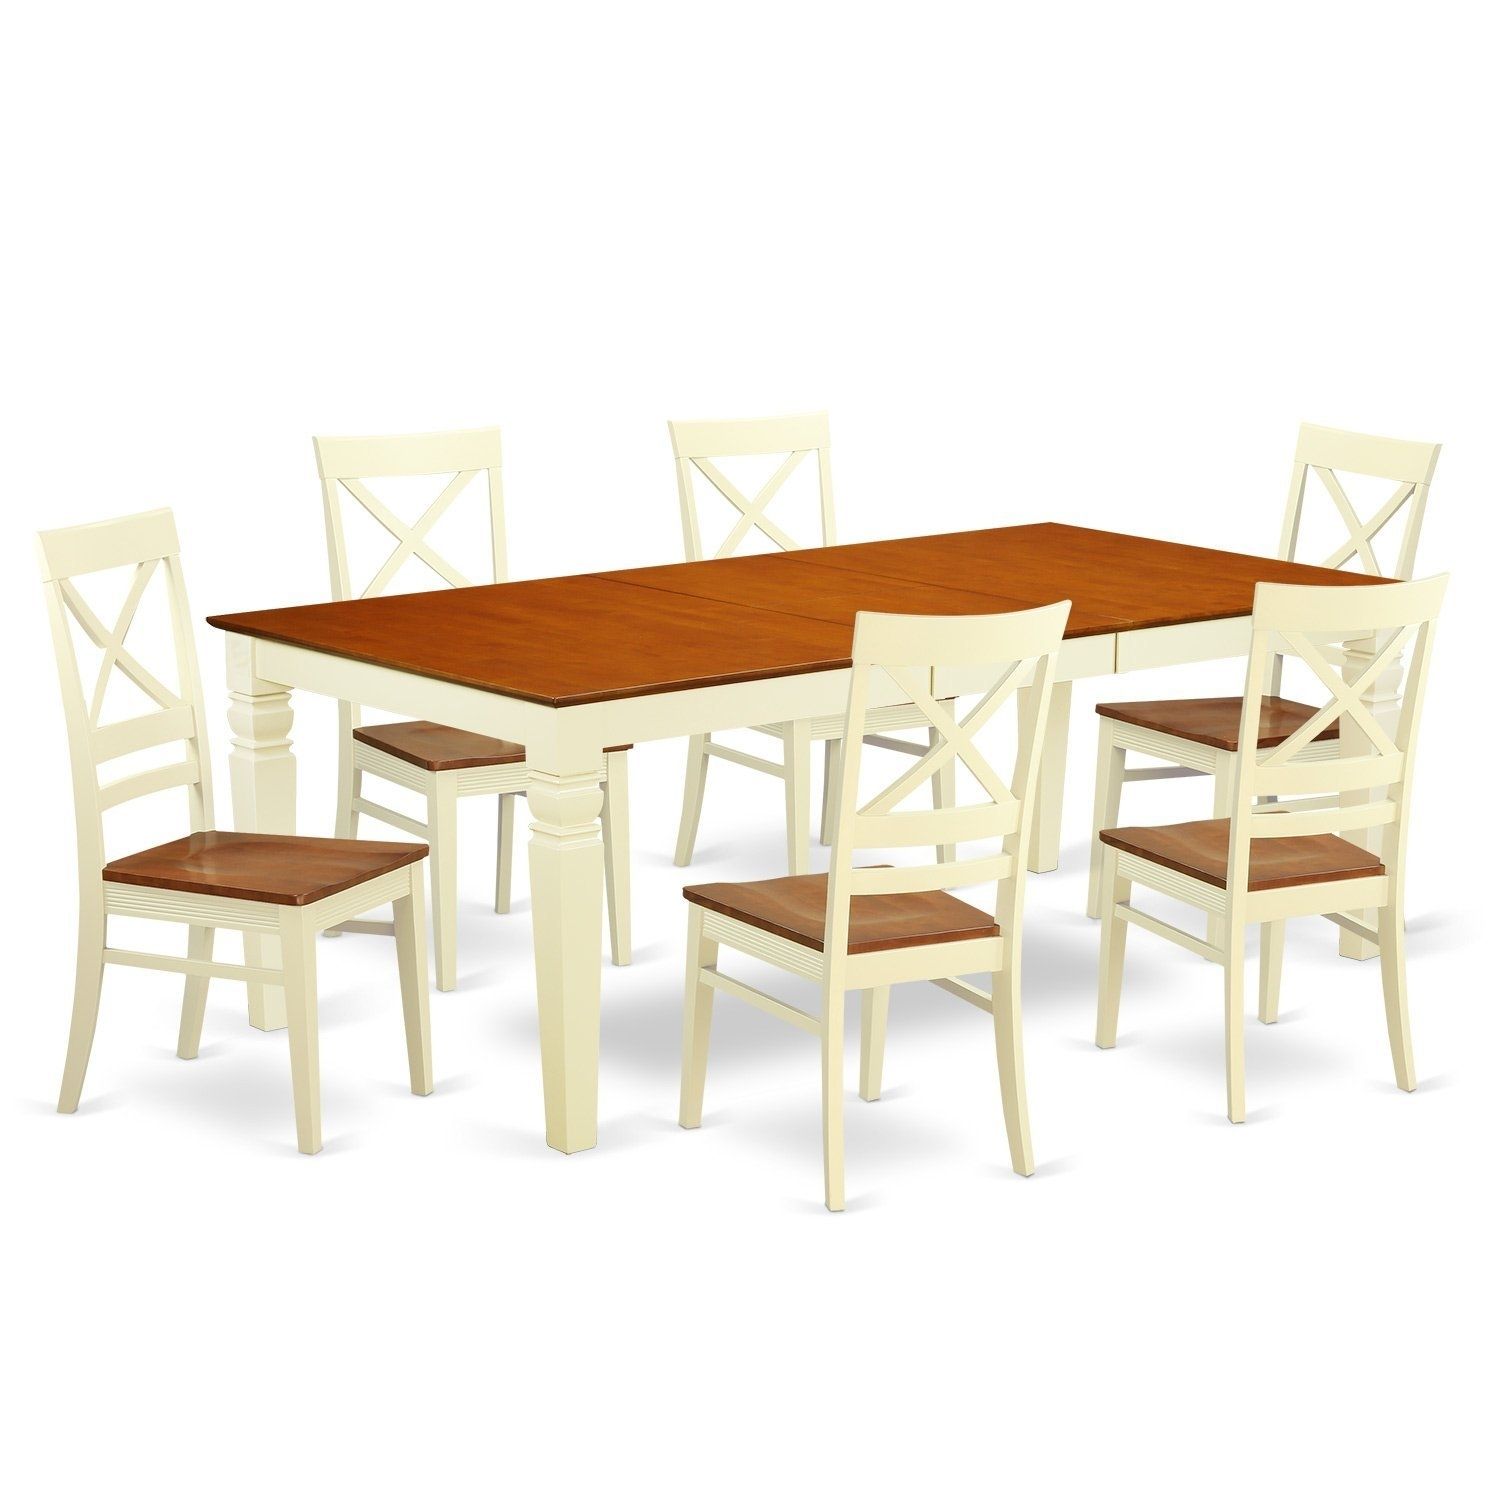 Cheap Dining Table Set 6, Find Dining Table Set 6 Deals On Line At Pertaining To Most Recently Released Logan 6 Piece Dining Sets (View 1 of 20)